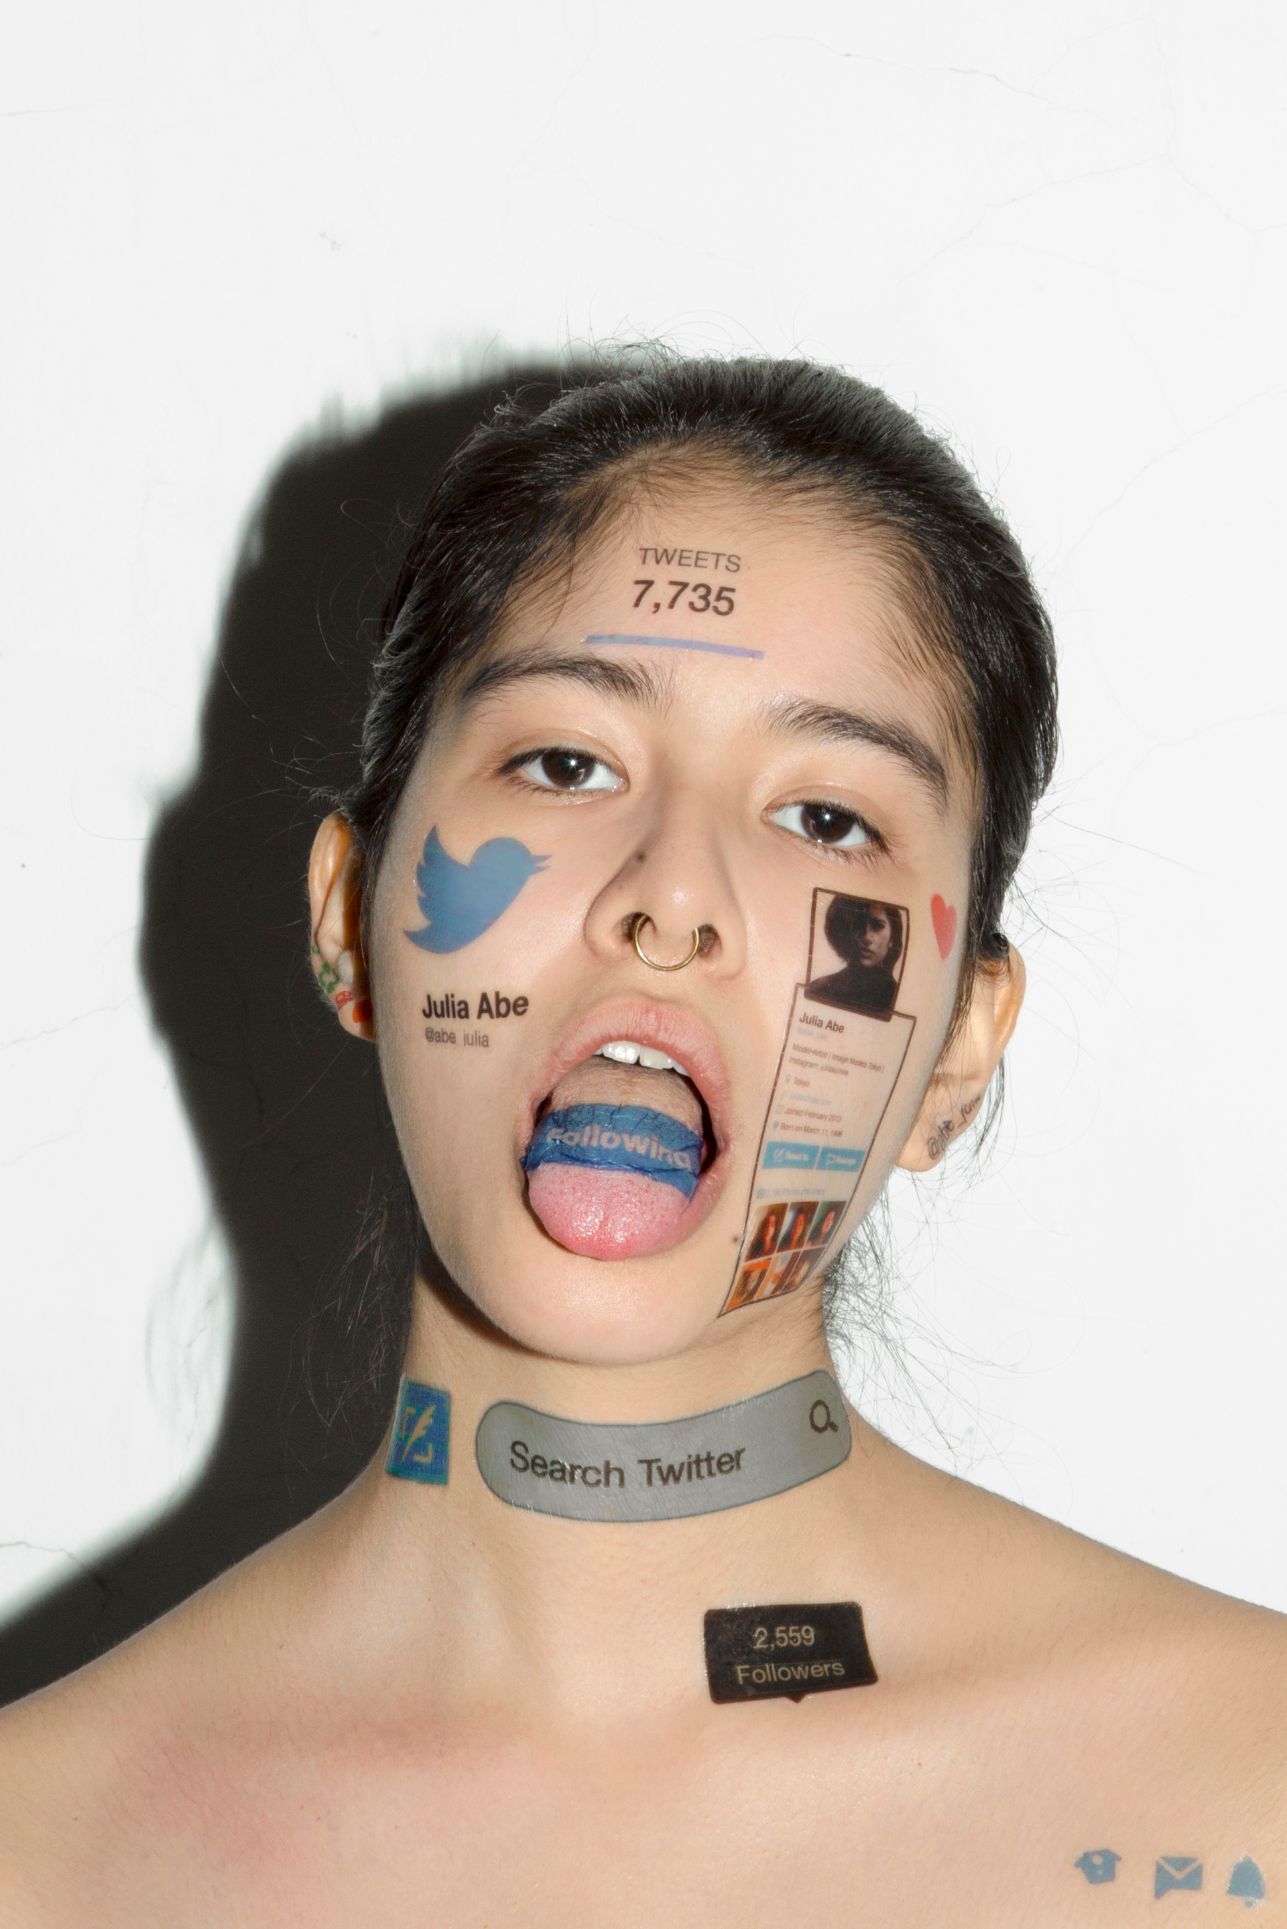 A woman's face with social media tattoos across it